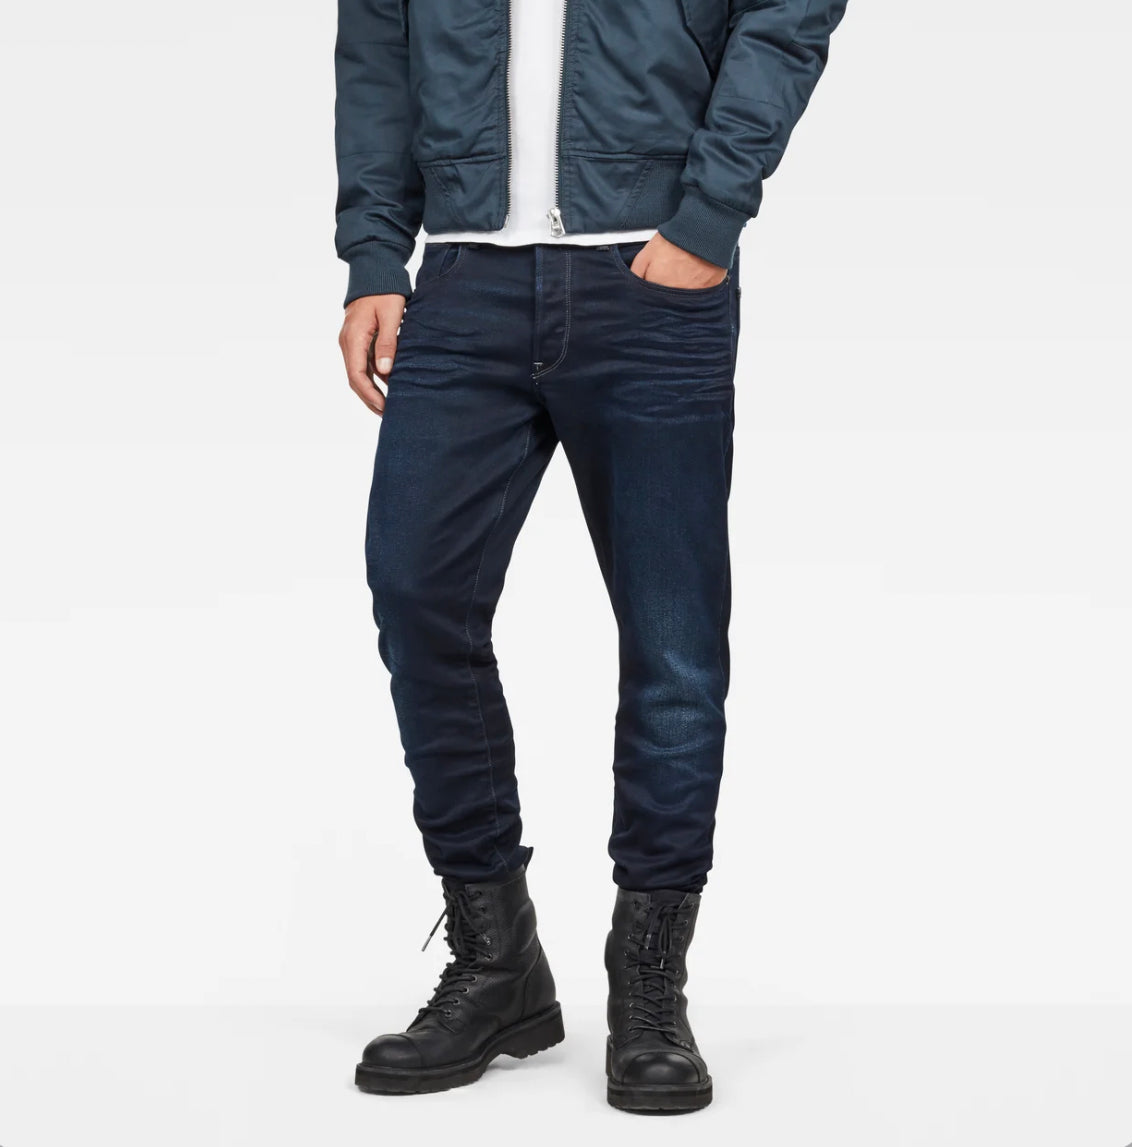 G-Star RAW 3301 TAPERED Men's - DK AGED – Moesports